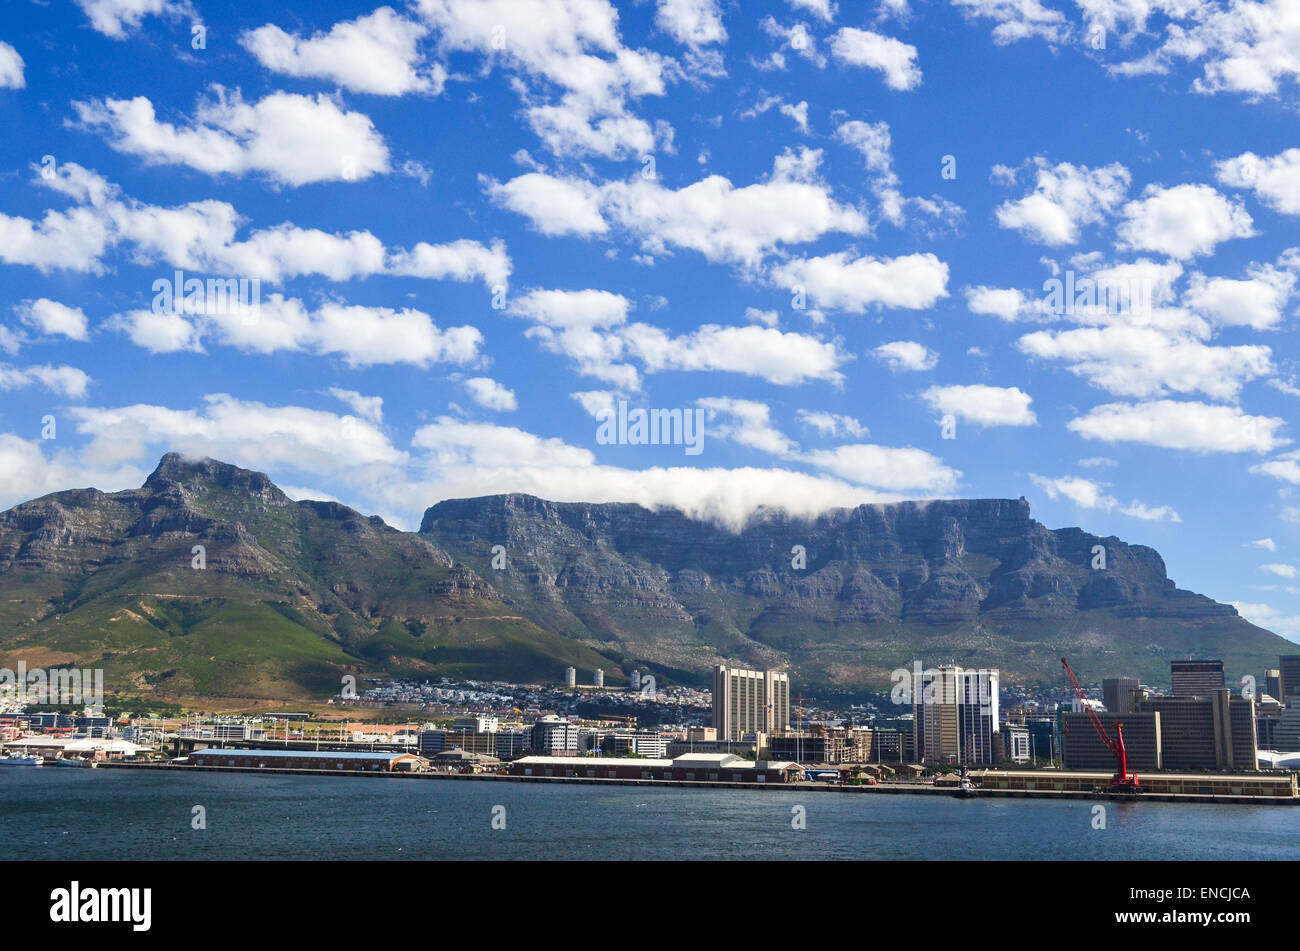 Table Mountain seen from a cargo ship in the port of Cape Town, South Africa Stock Photo